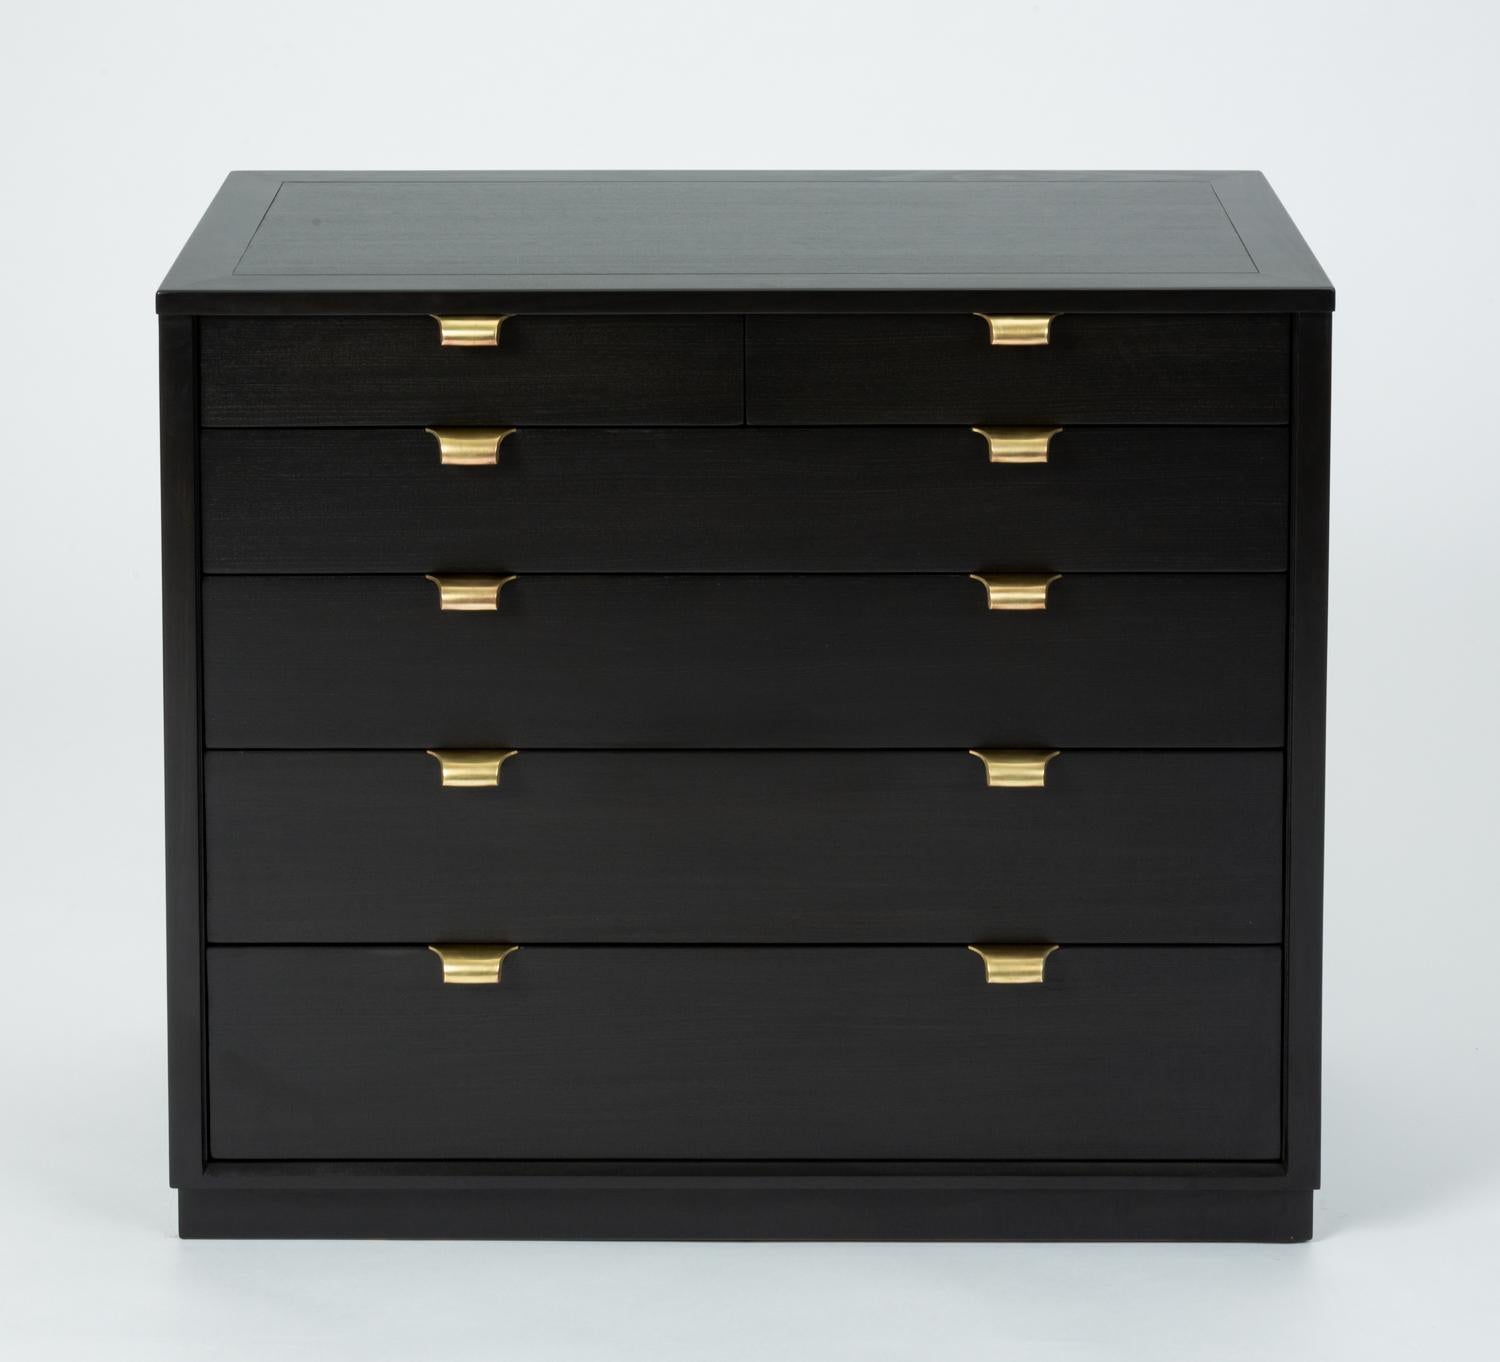 Mid-Century Modern Ebonized Chest of Drawers from Edward Wormley’s Precedent Collection for Drexel